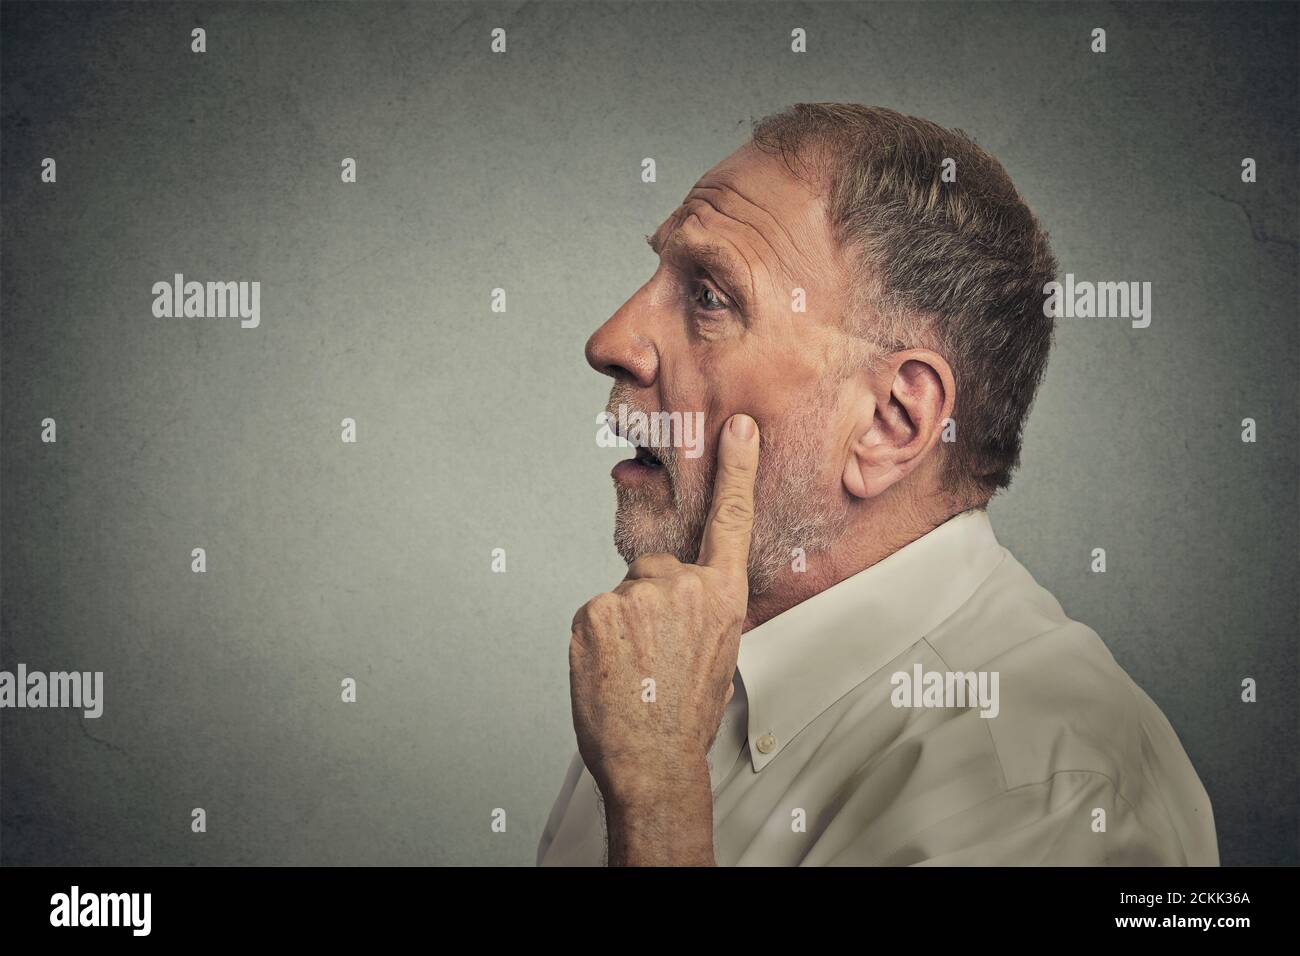 Portrait worried man thinking looking up isolated on grey wall background with copy space. Human face expressions, emotions, feelings, body language, Stock Photo